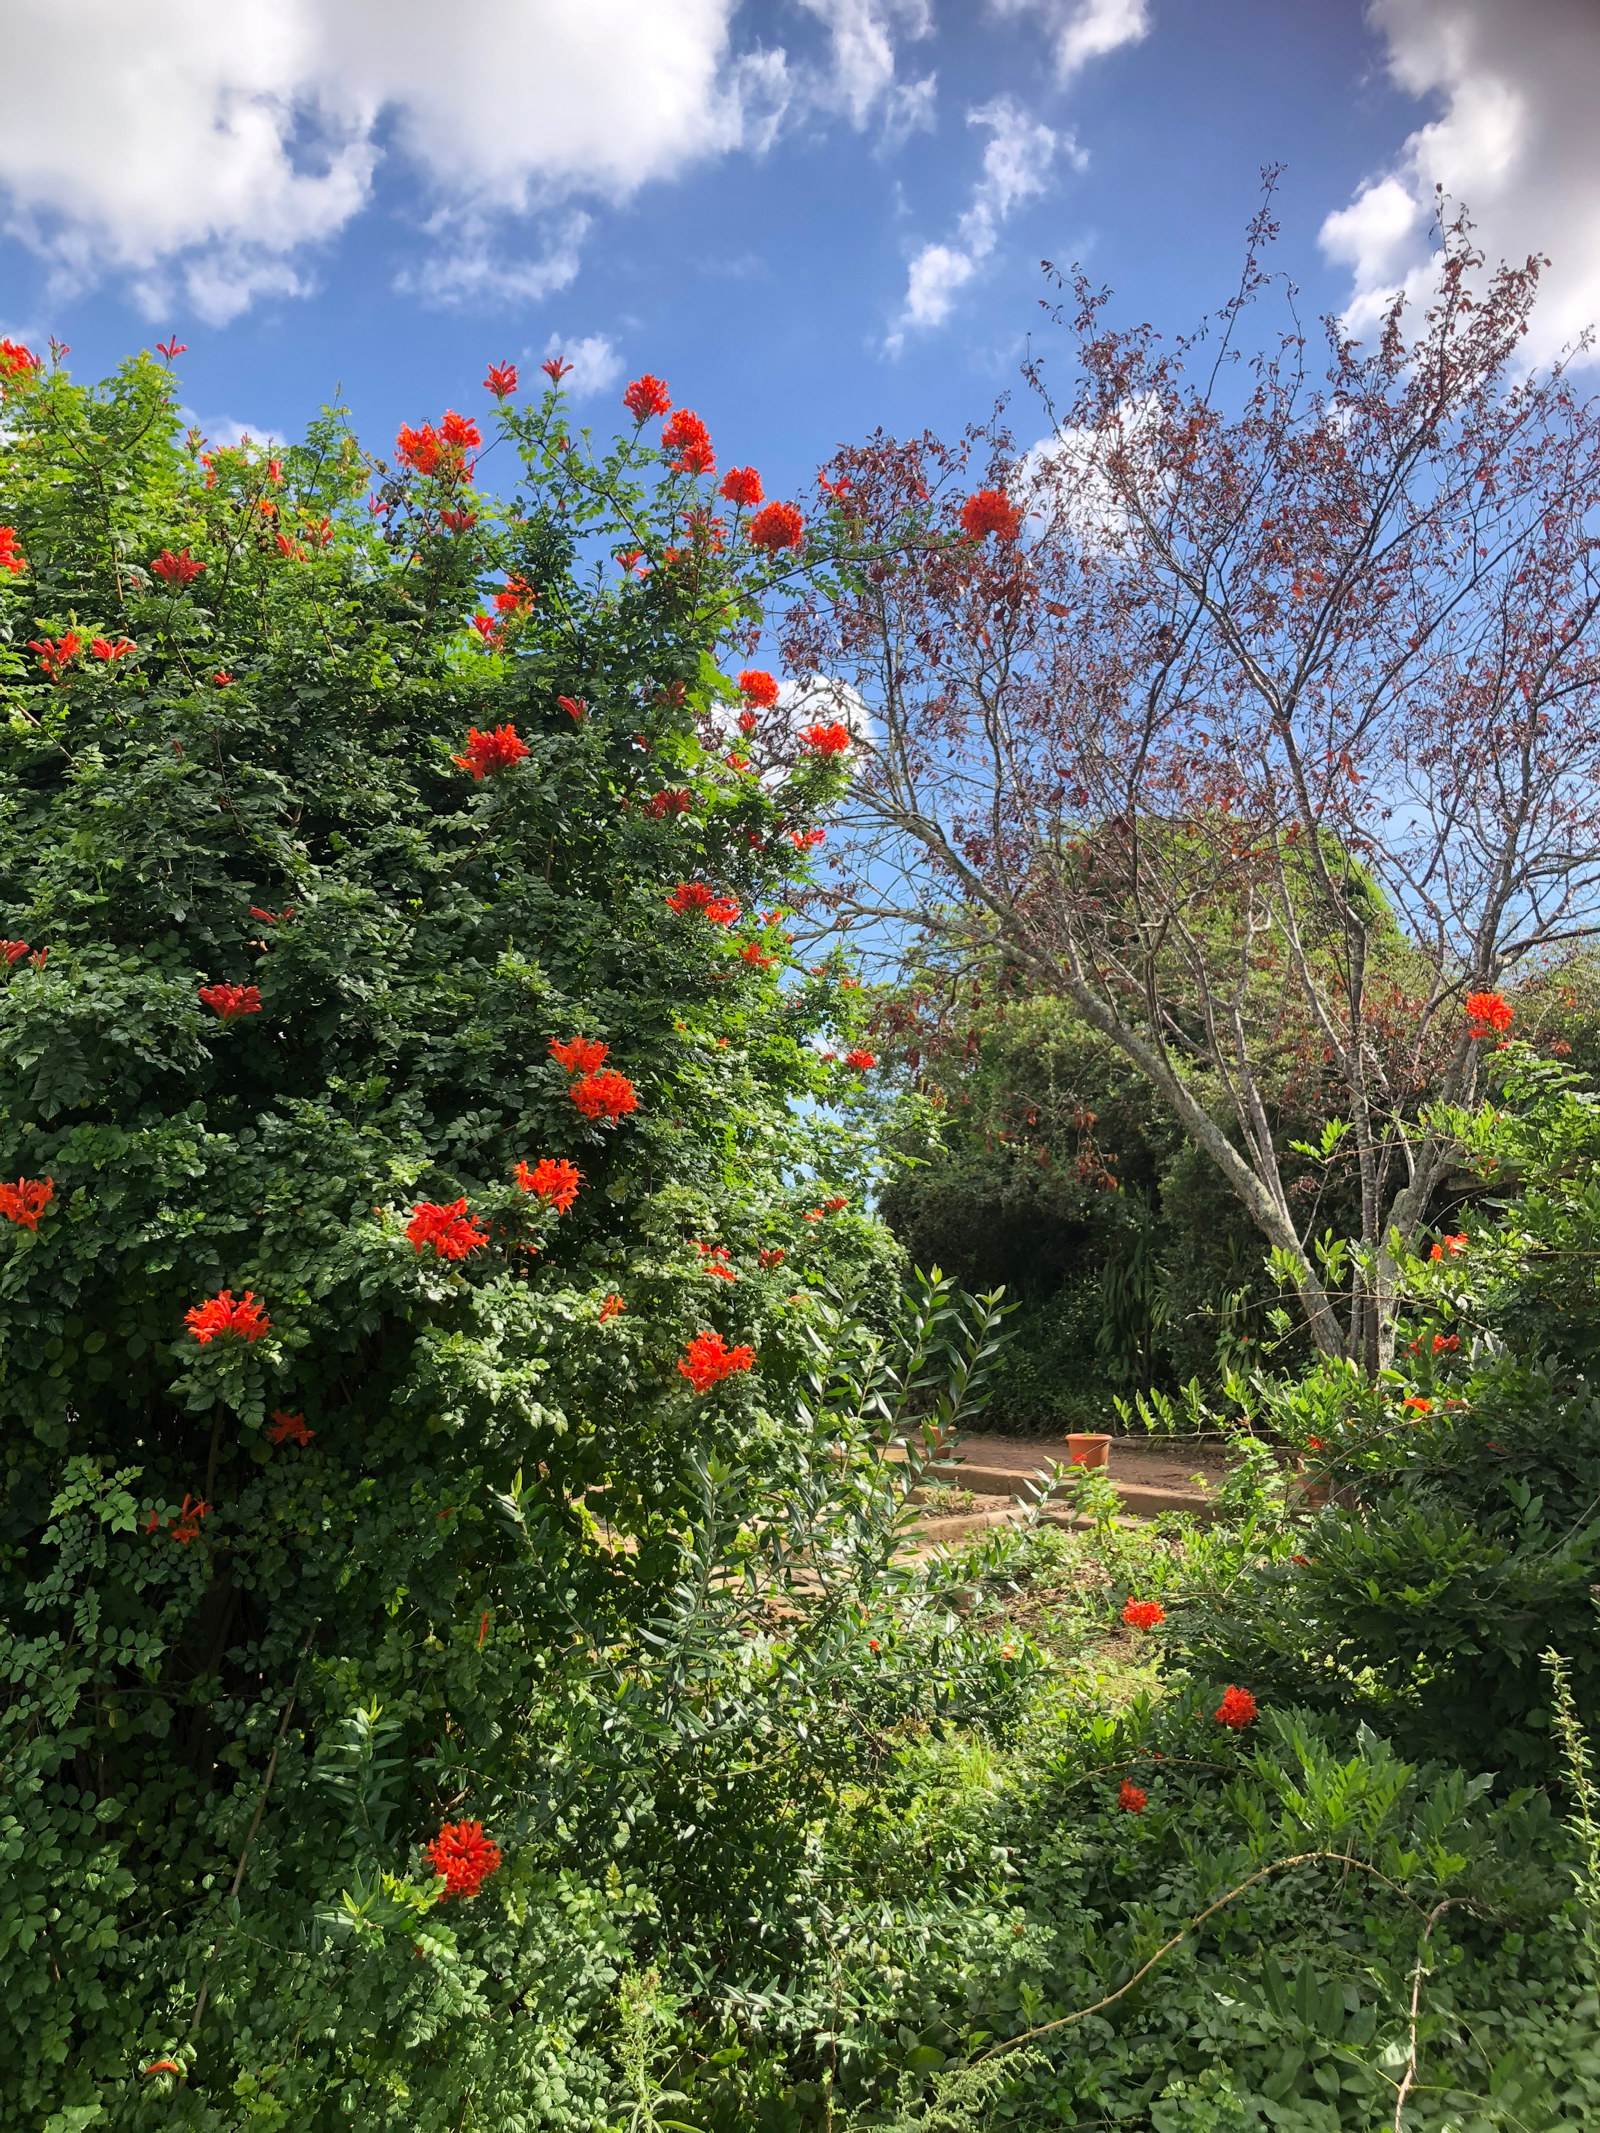 the foreground shows the red-orange blooms of the Tecoma capensis with the contrasting purple foliage of the purple plum tree.